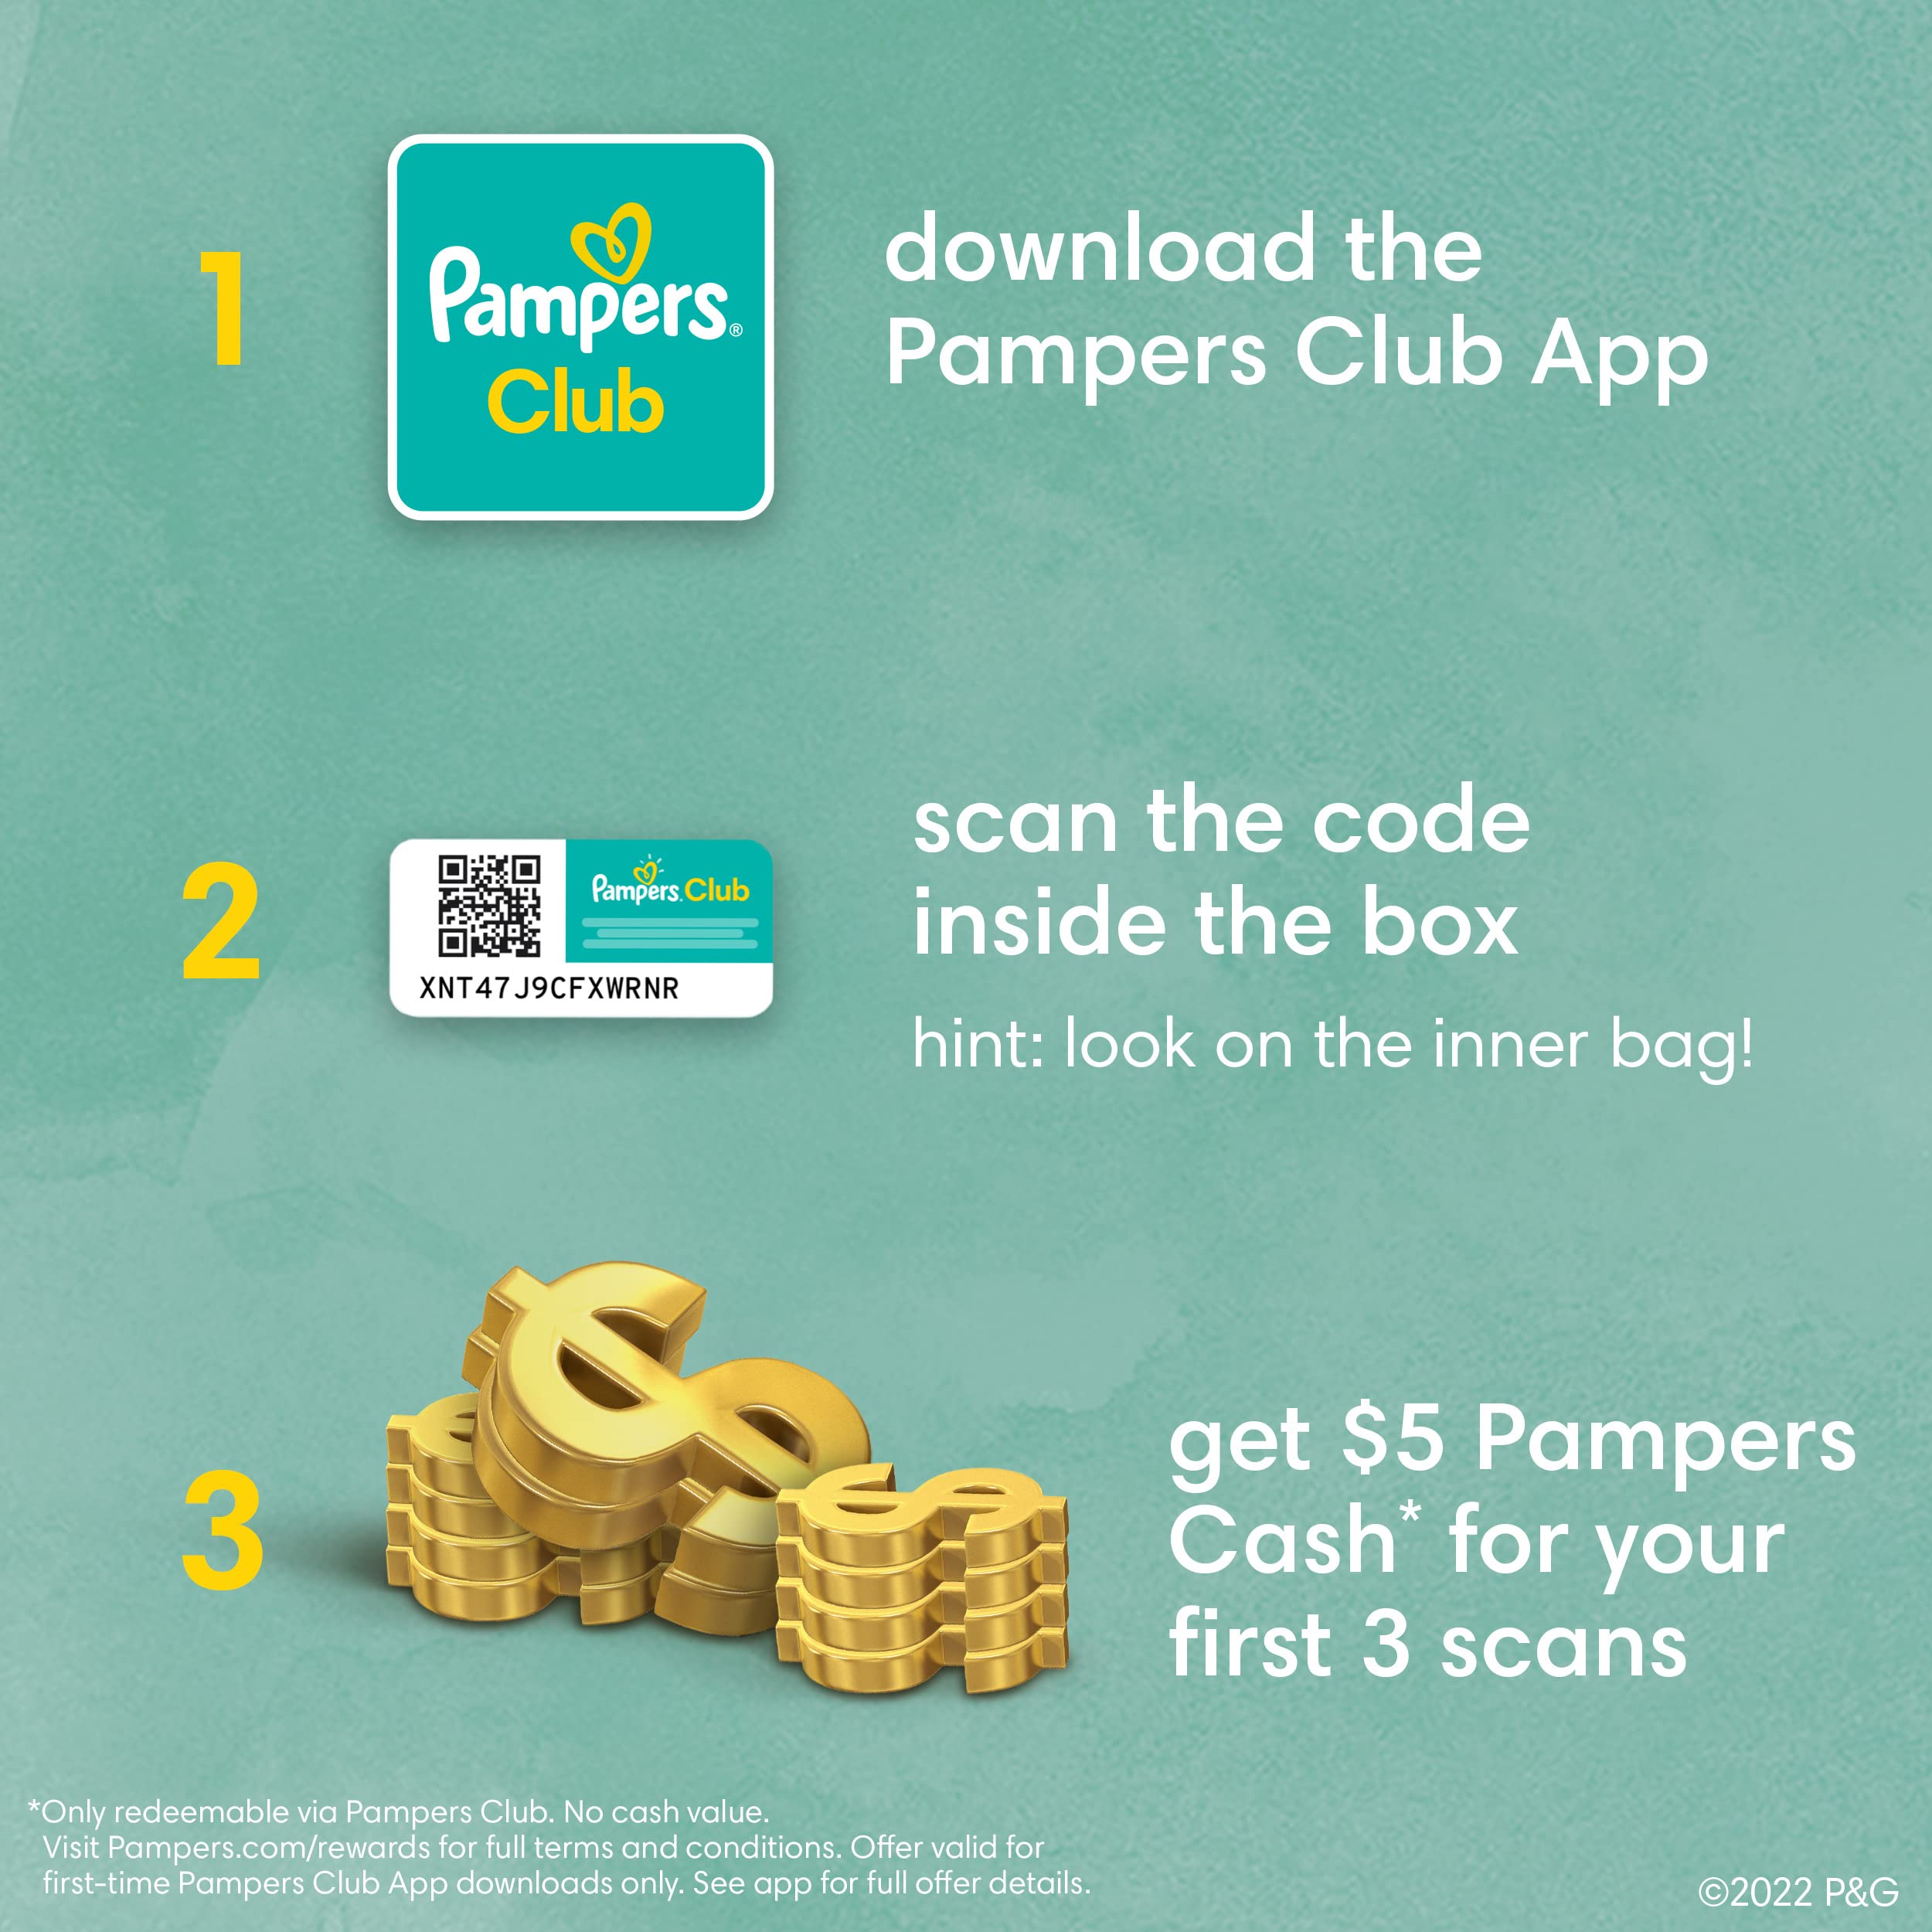 Pampers Pure Protection Diapers Size 7 88 Count